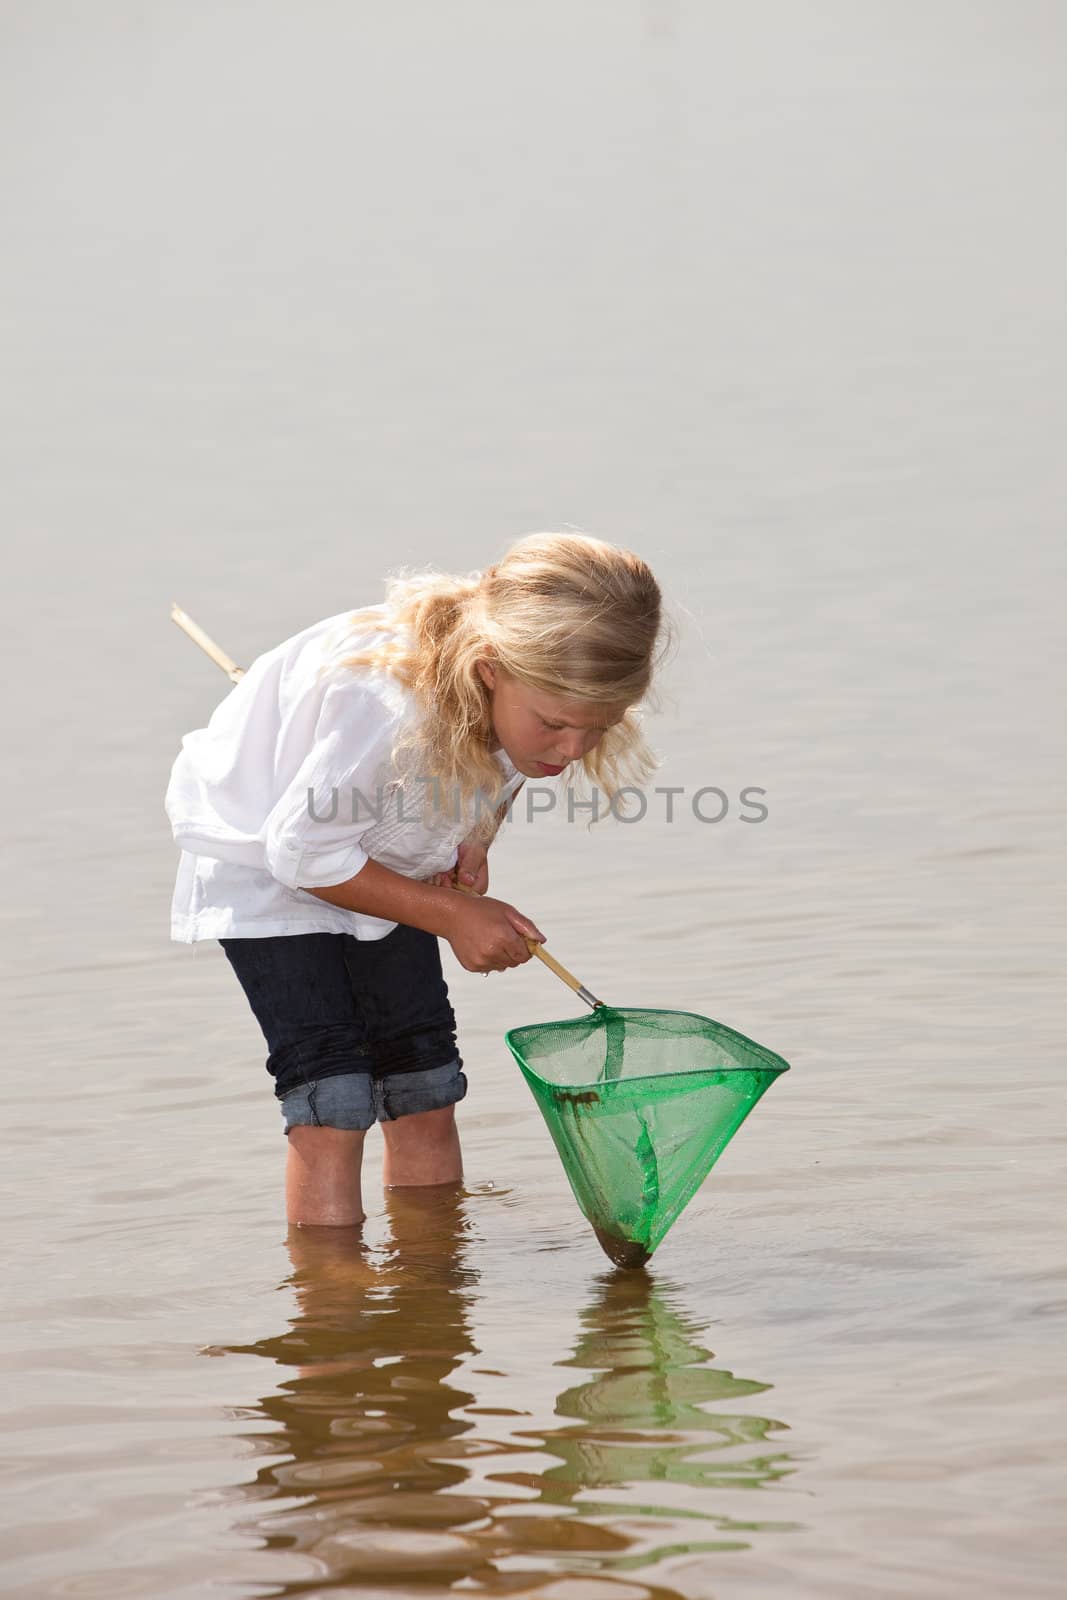 Young kid checking the content of her net to see if she has caught anything